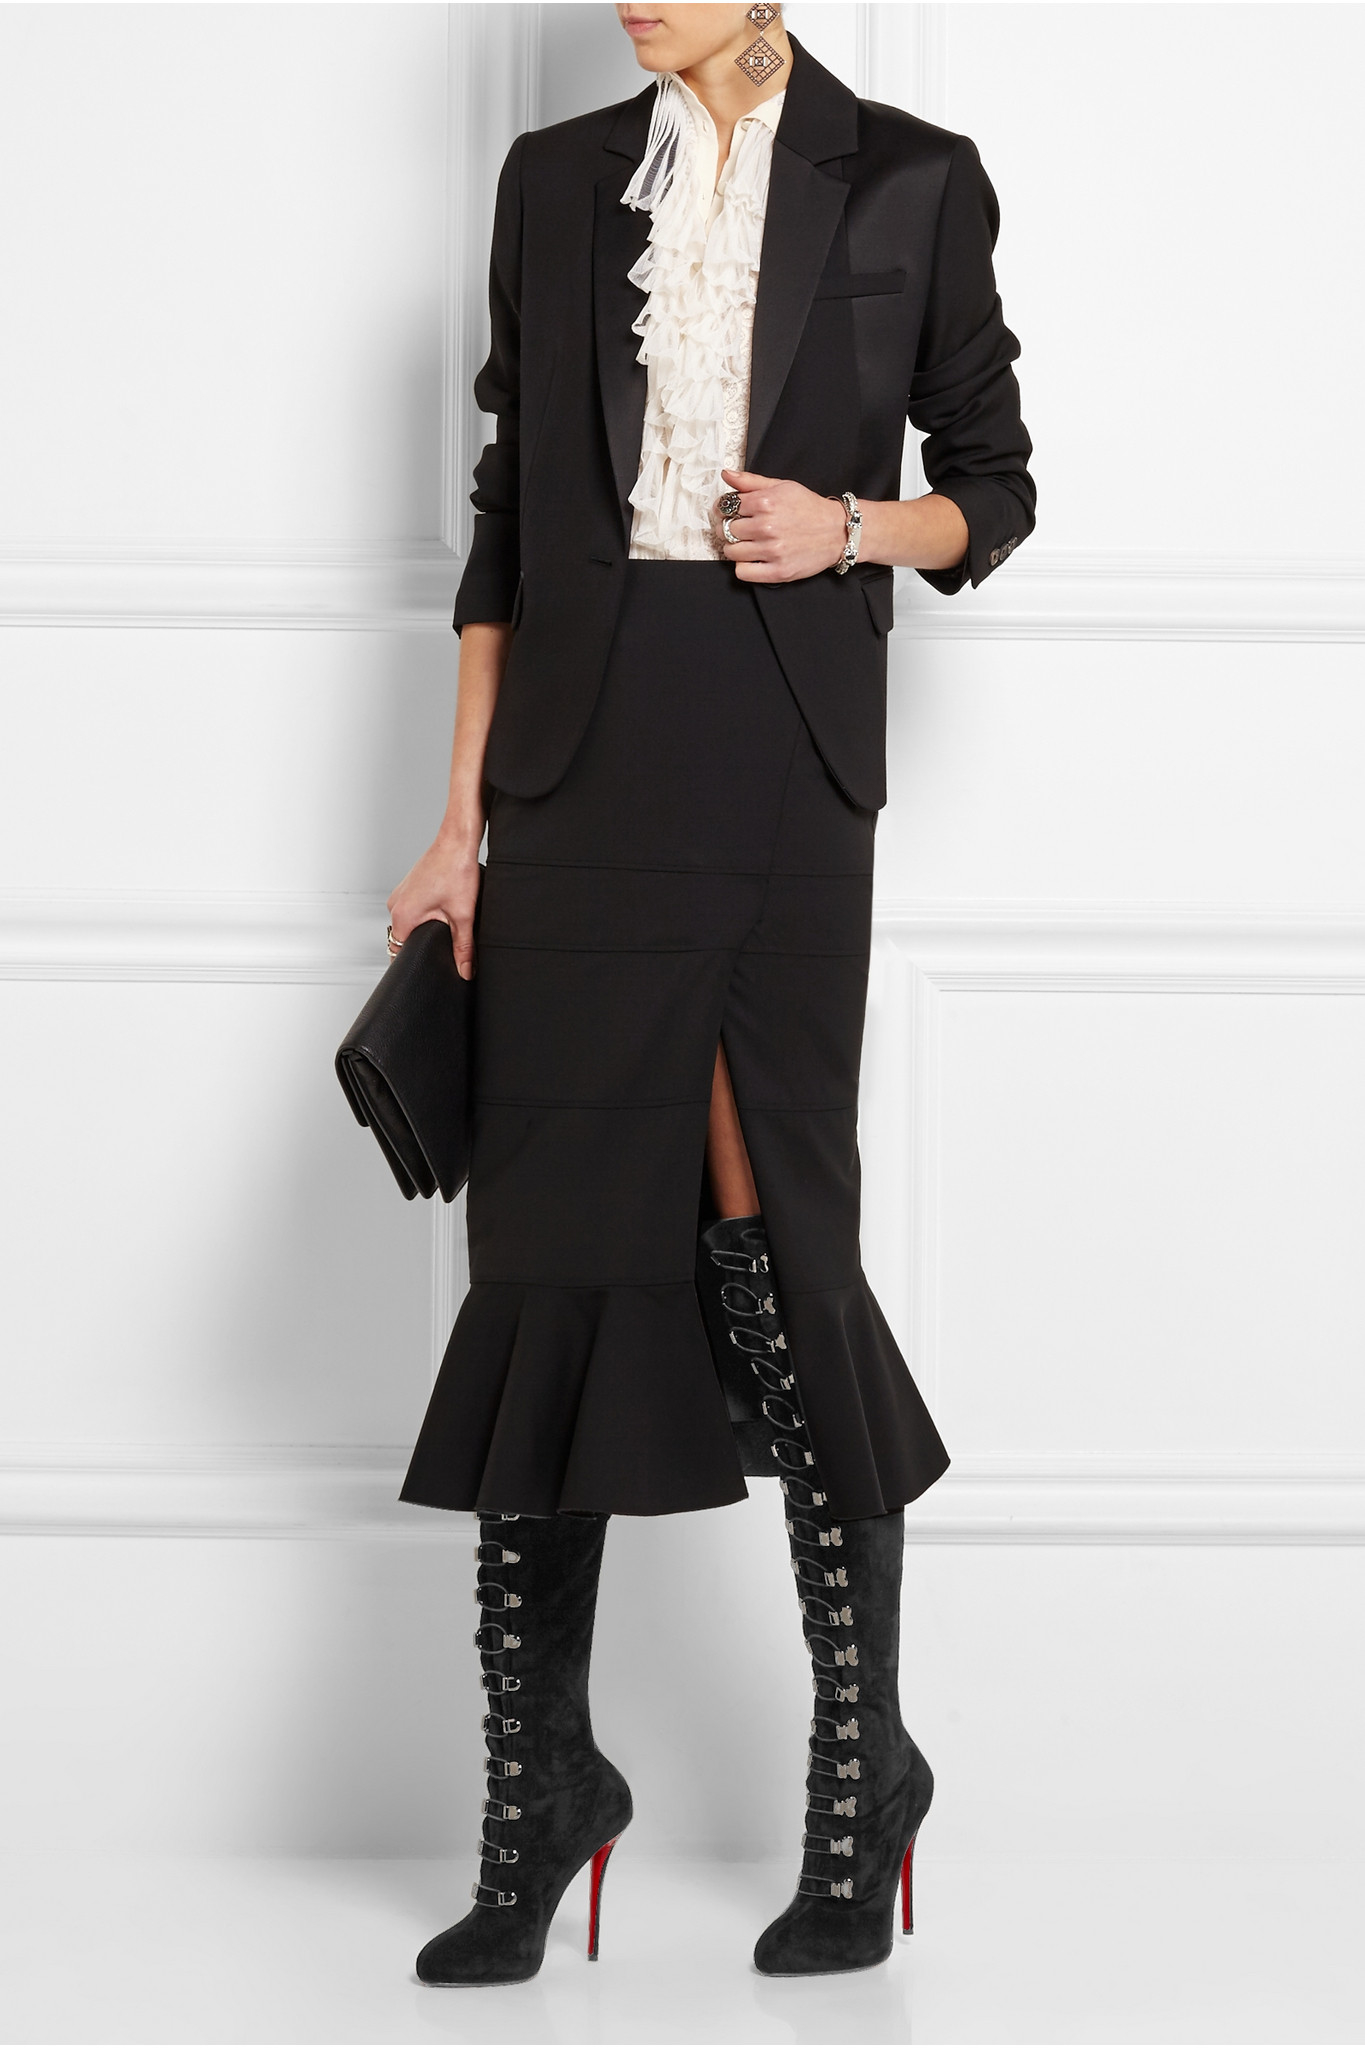 Christian louboutin Top Croche 120 Suede Over-The-Knee Boots in ...